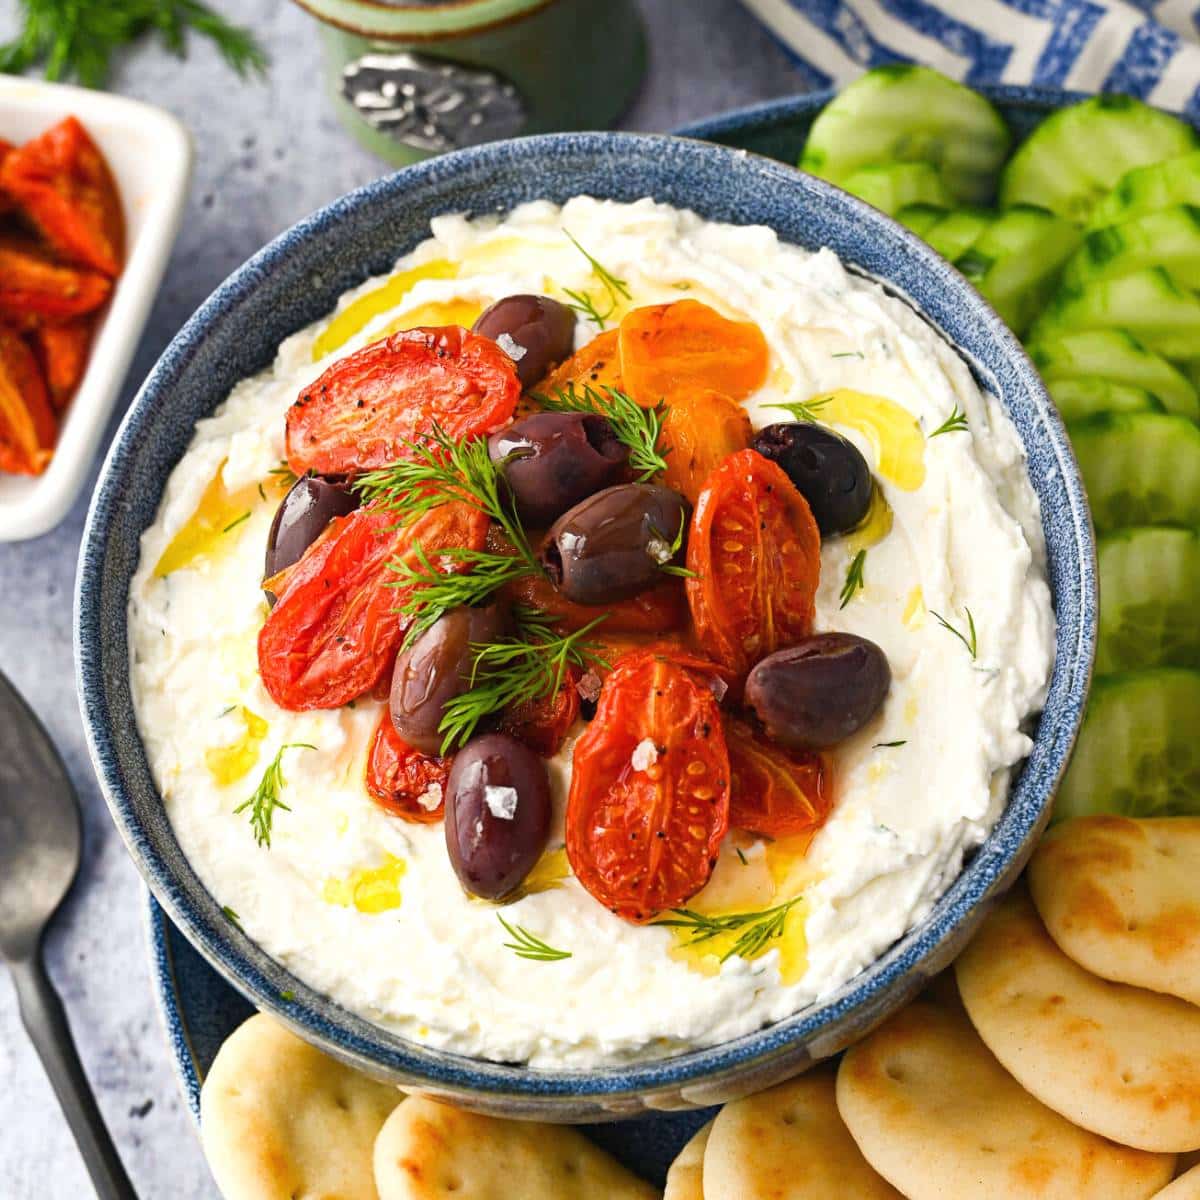 whipped feta dip in a blue serving bowl with a side of roasted tomatoes, cucumbers, and mini Naan bread rounds